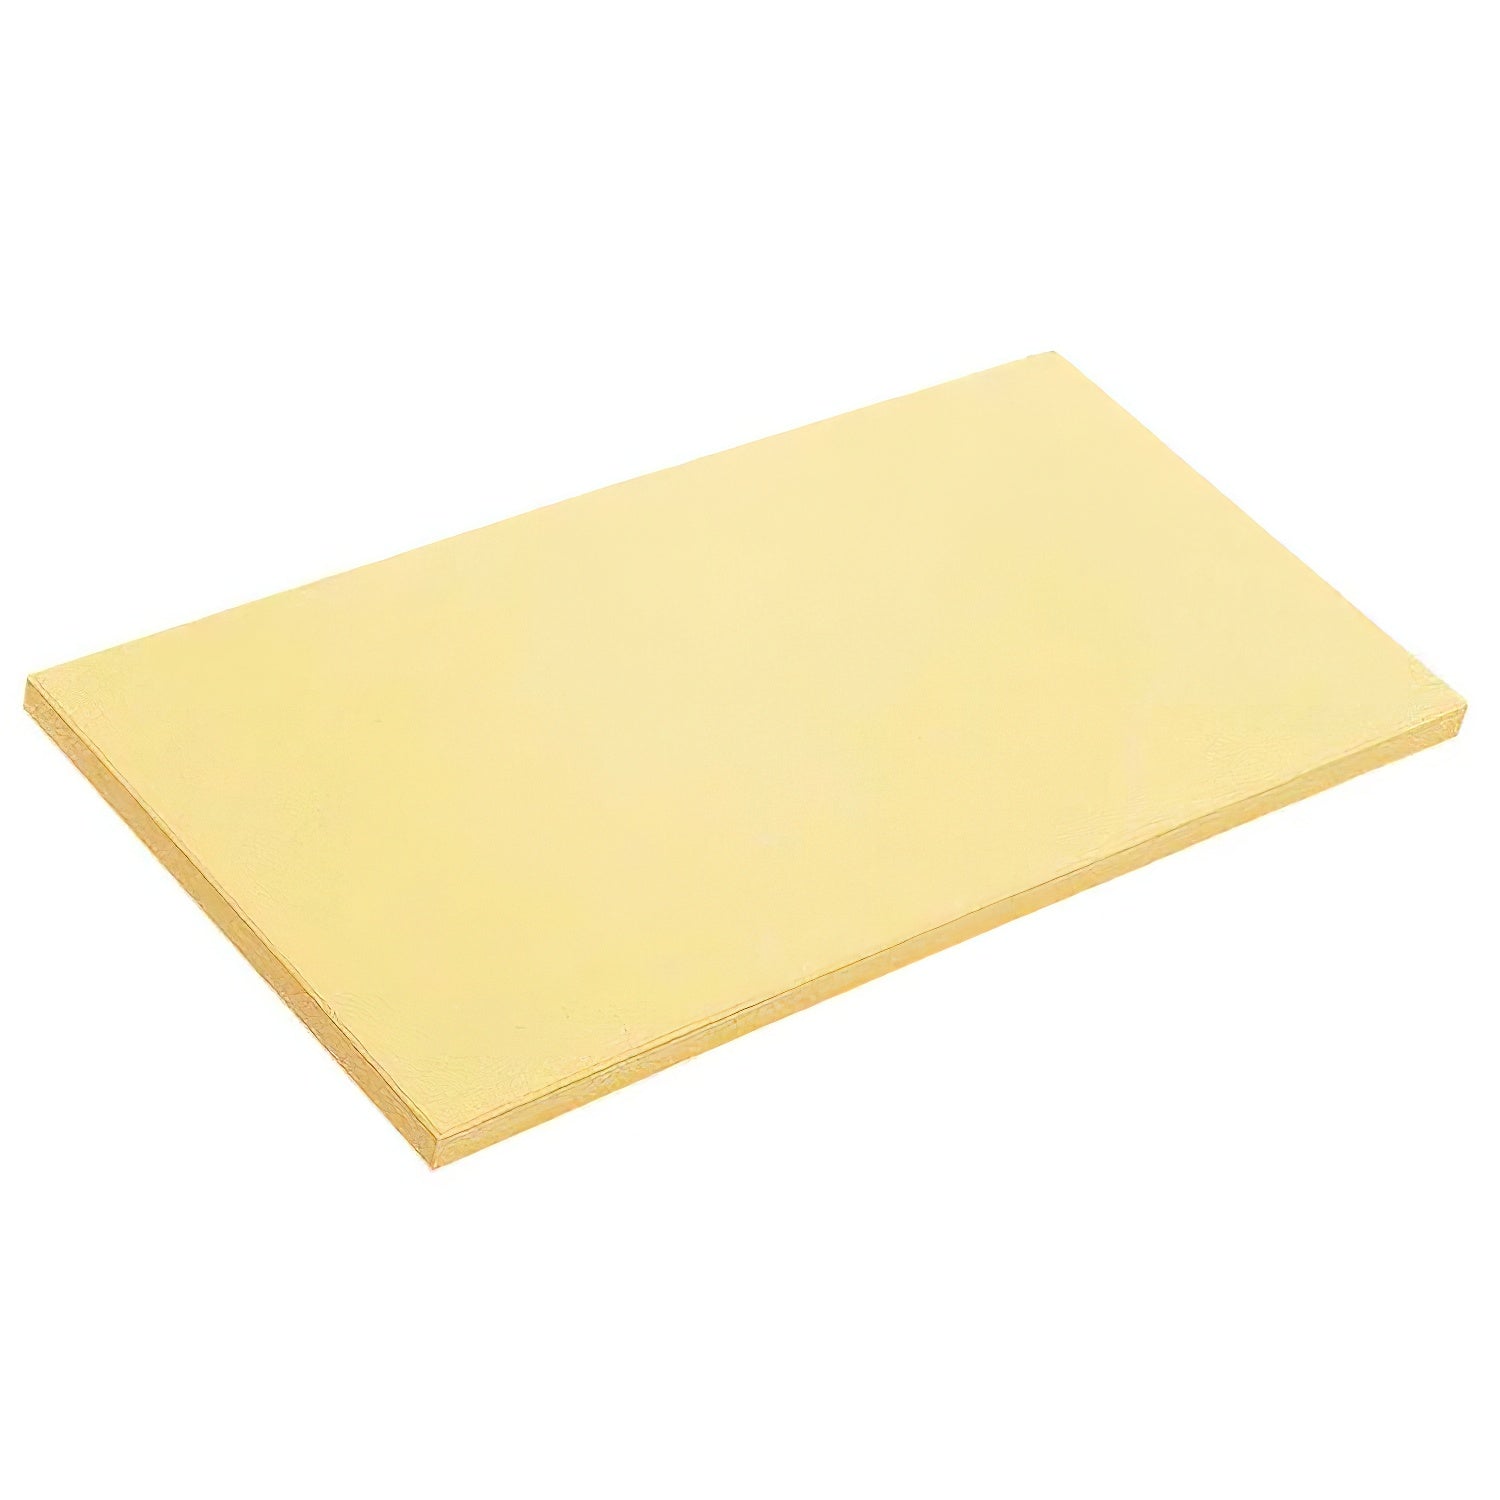 Asahi Japan Synthetic Rubber Cutting Board - 1800x900x30mm: Durable and Versatile